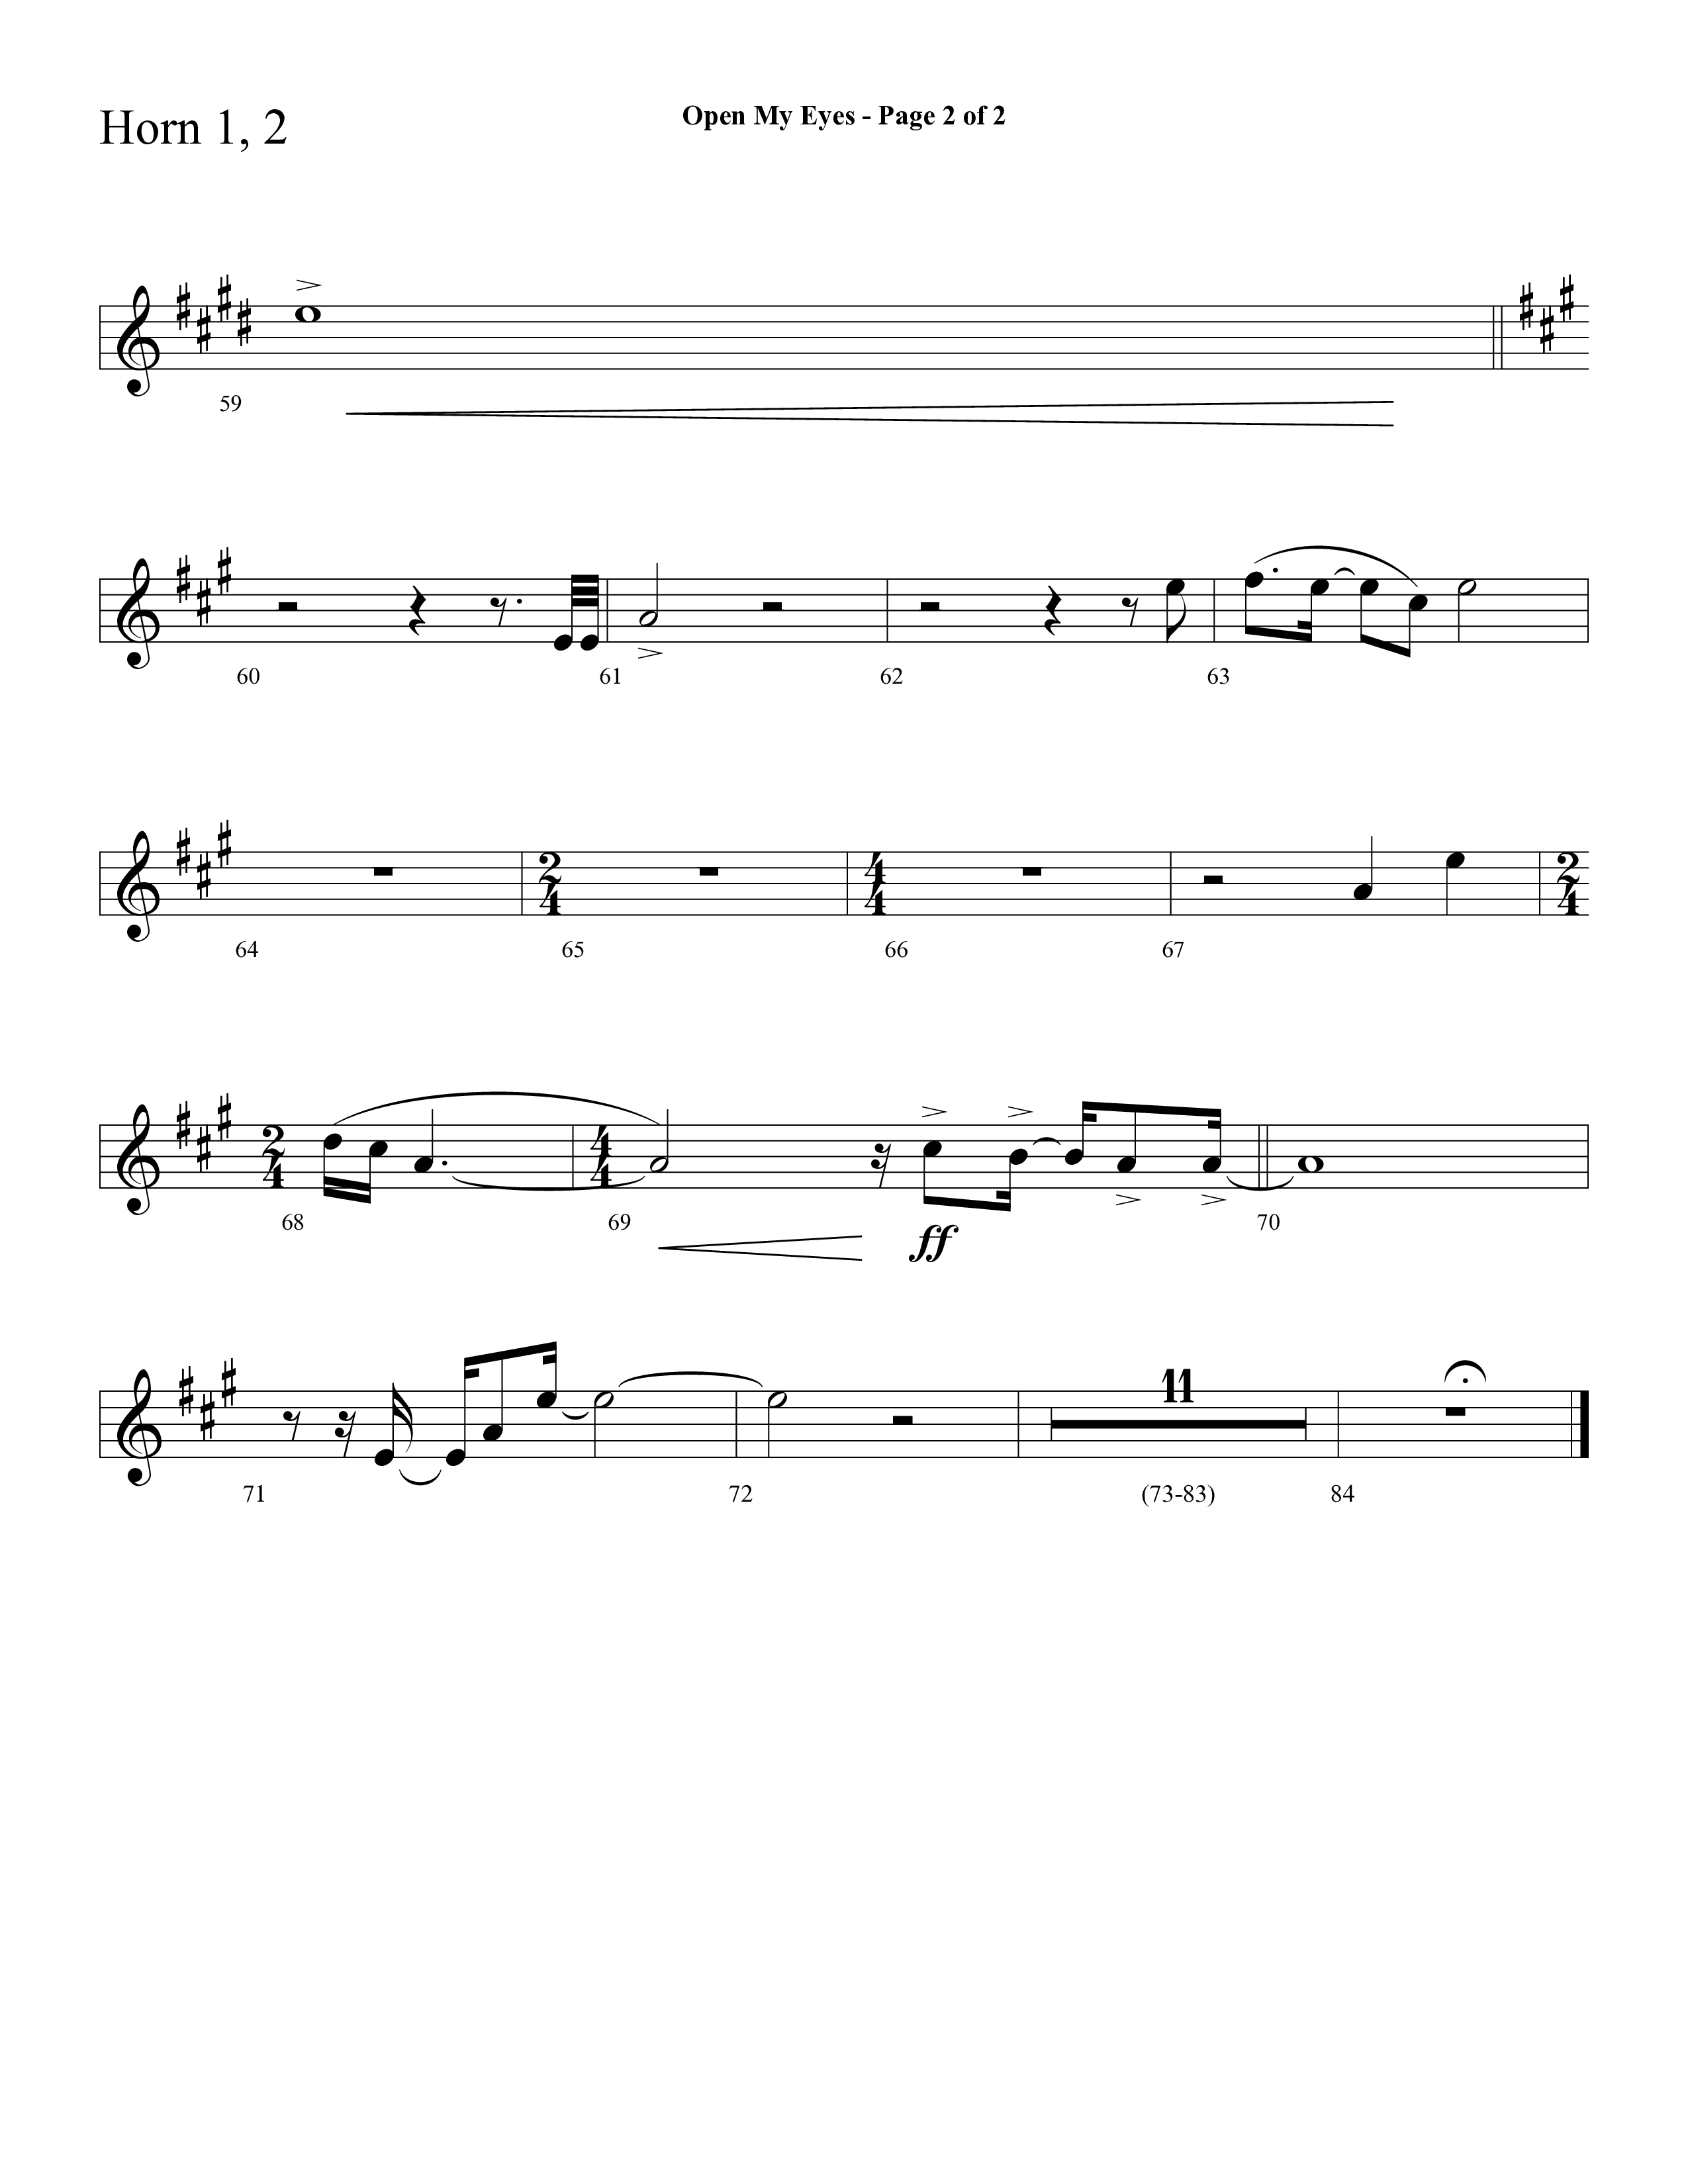 Open My Eyes (with Be Thou My Vision) (Choral Anthem SATB) French Horn 1/2 (Arr. Cliff Duren / Lifeway Choral)